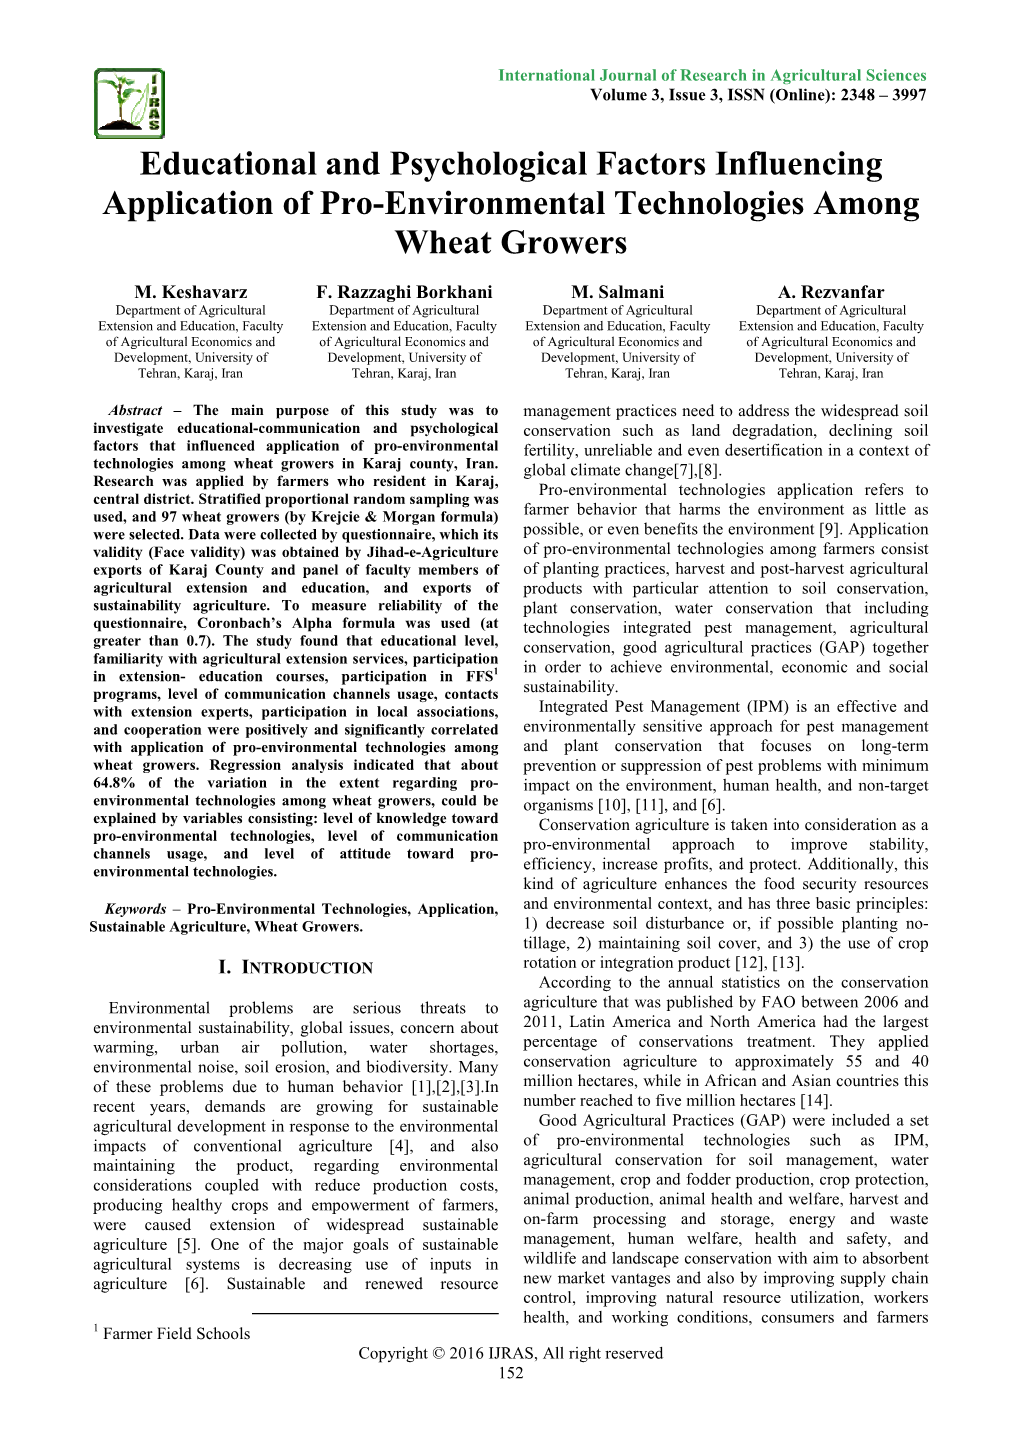 Educational and Psychological Factors Influencing Application of Pro-Environmental Technologies Among Wheat Growers